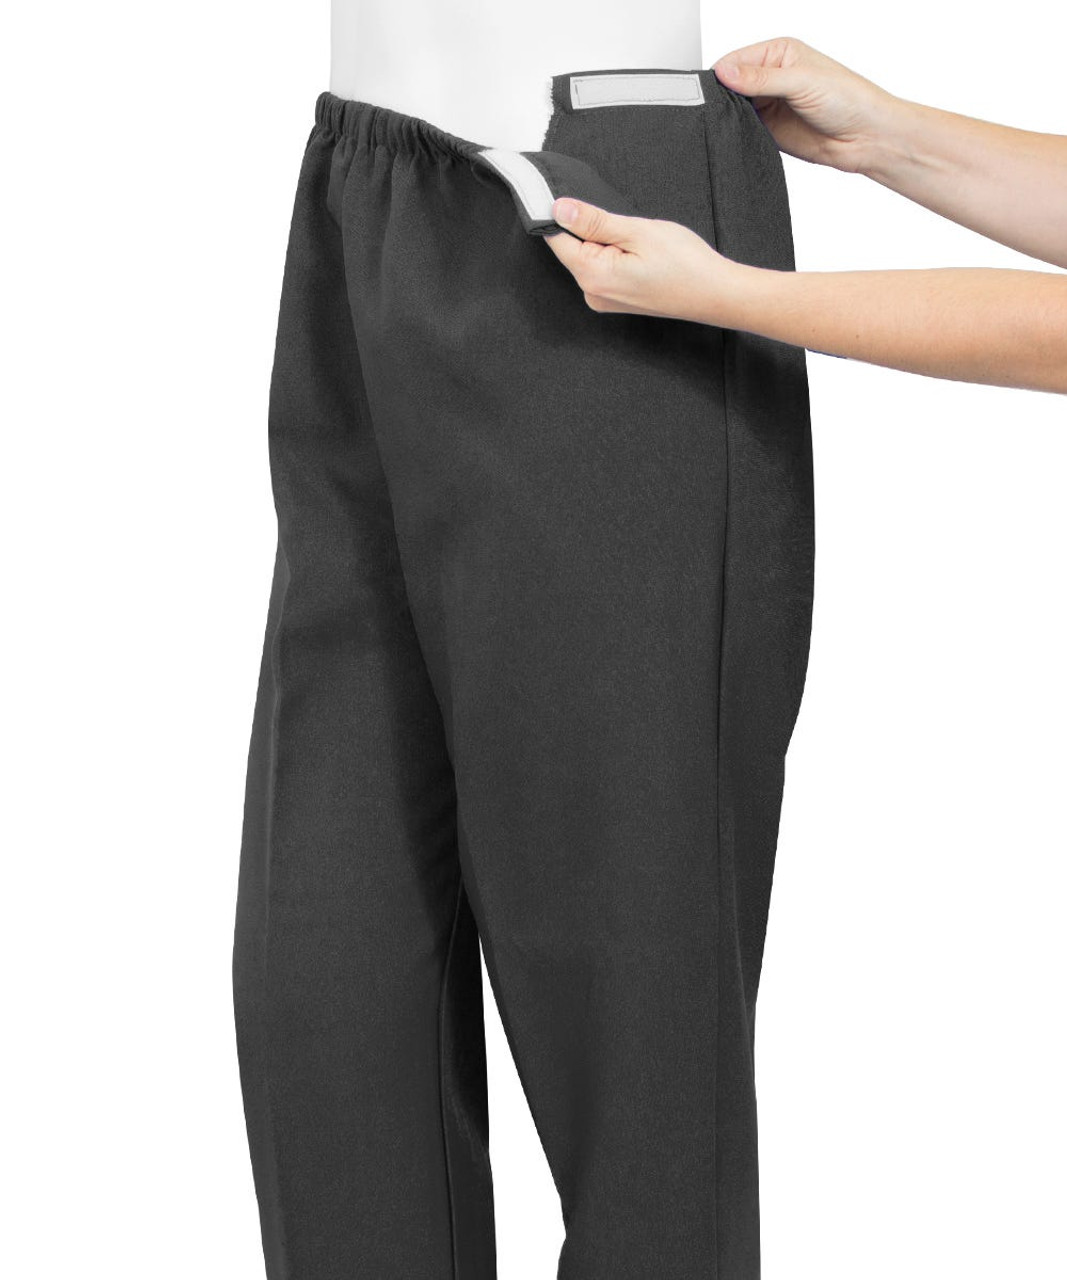 Silverts SV23120 Soft Knit Easy Access Pants for Women Charcoal, Size=3XL, SV23120-SV7-3XL